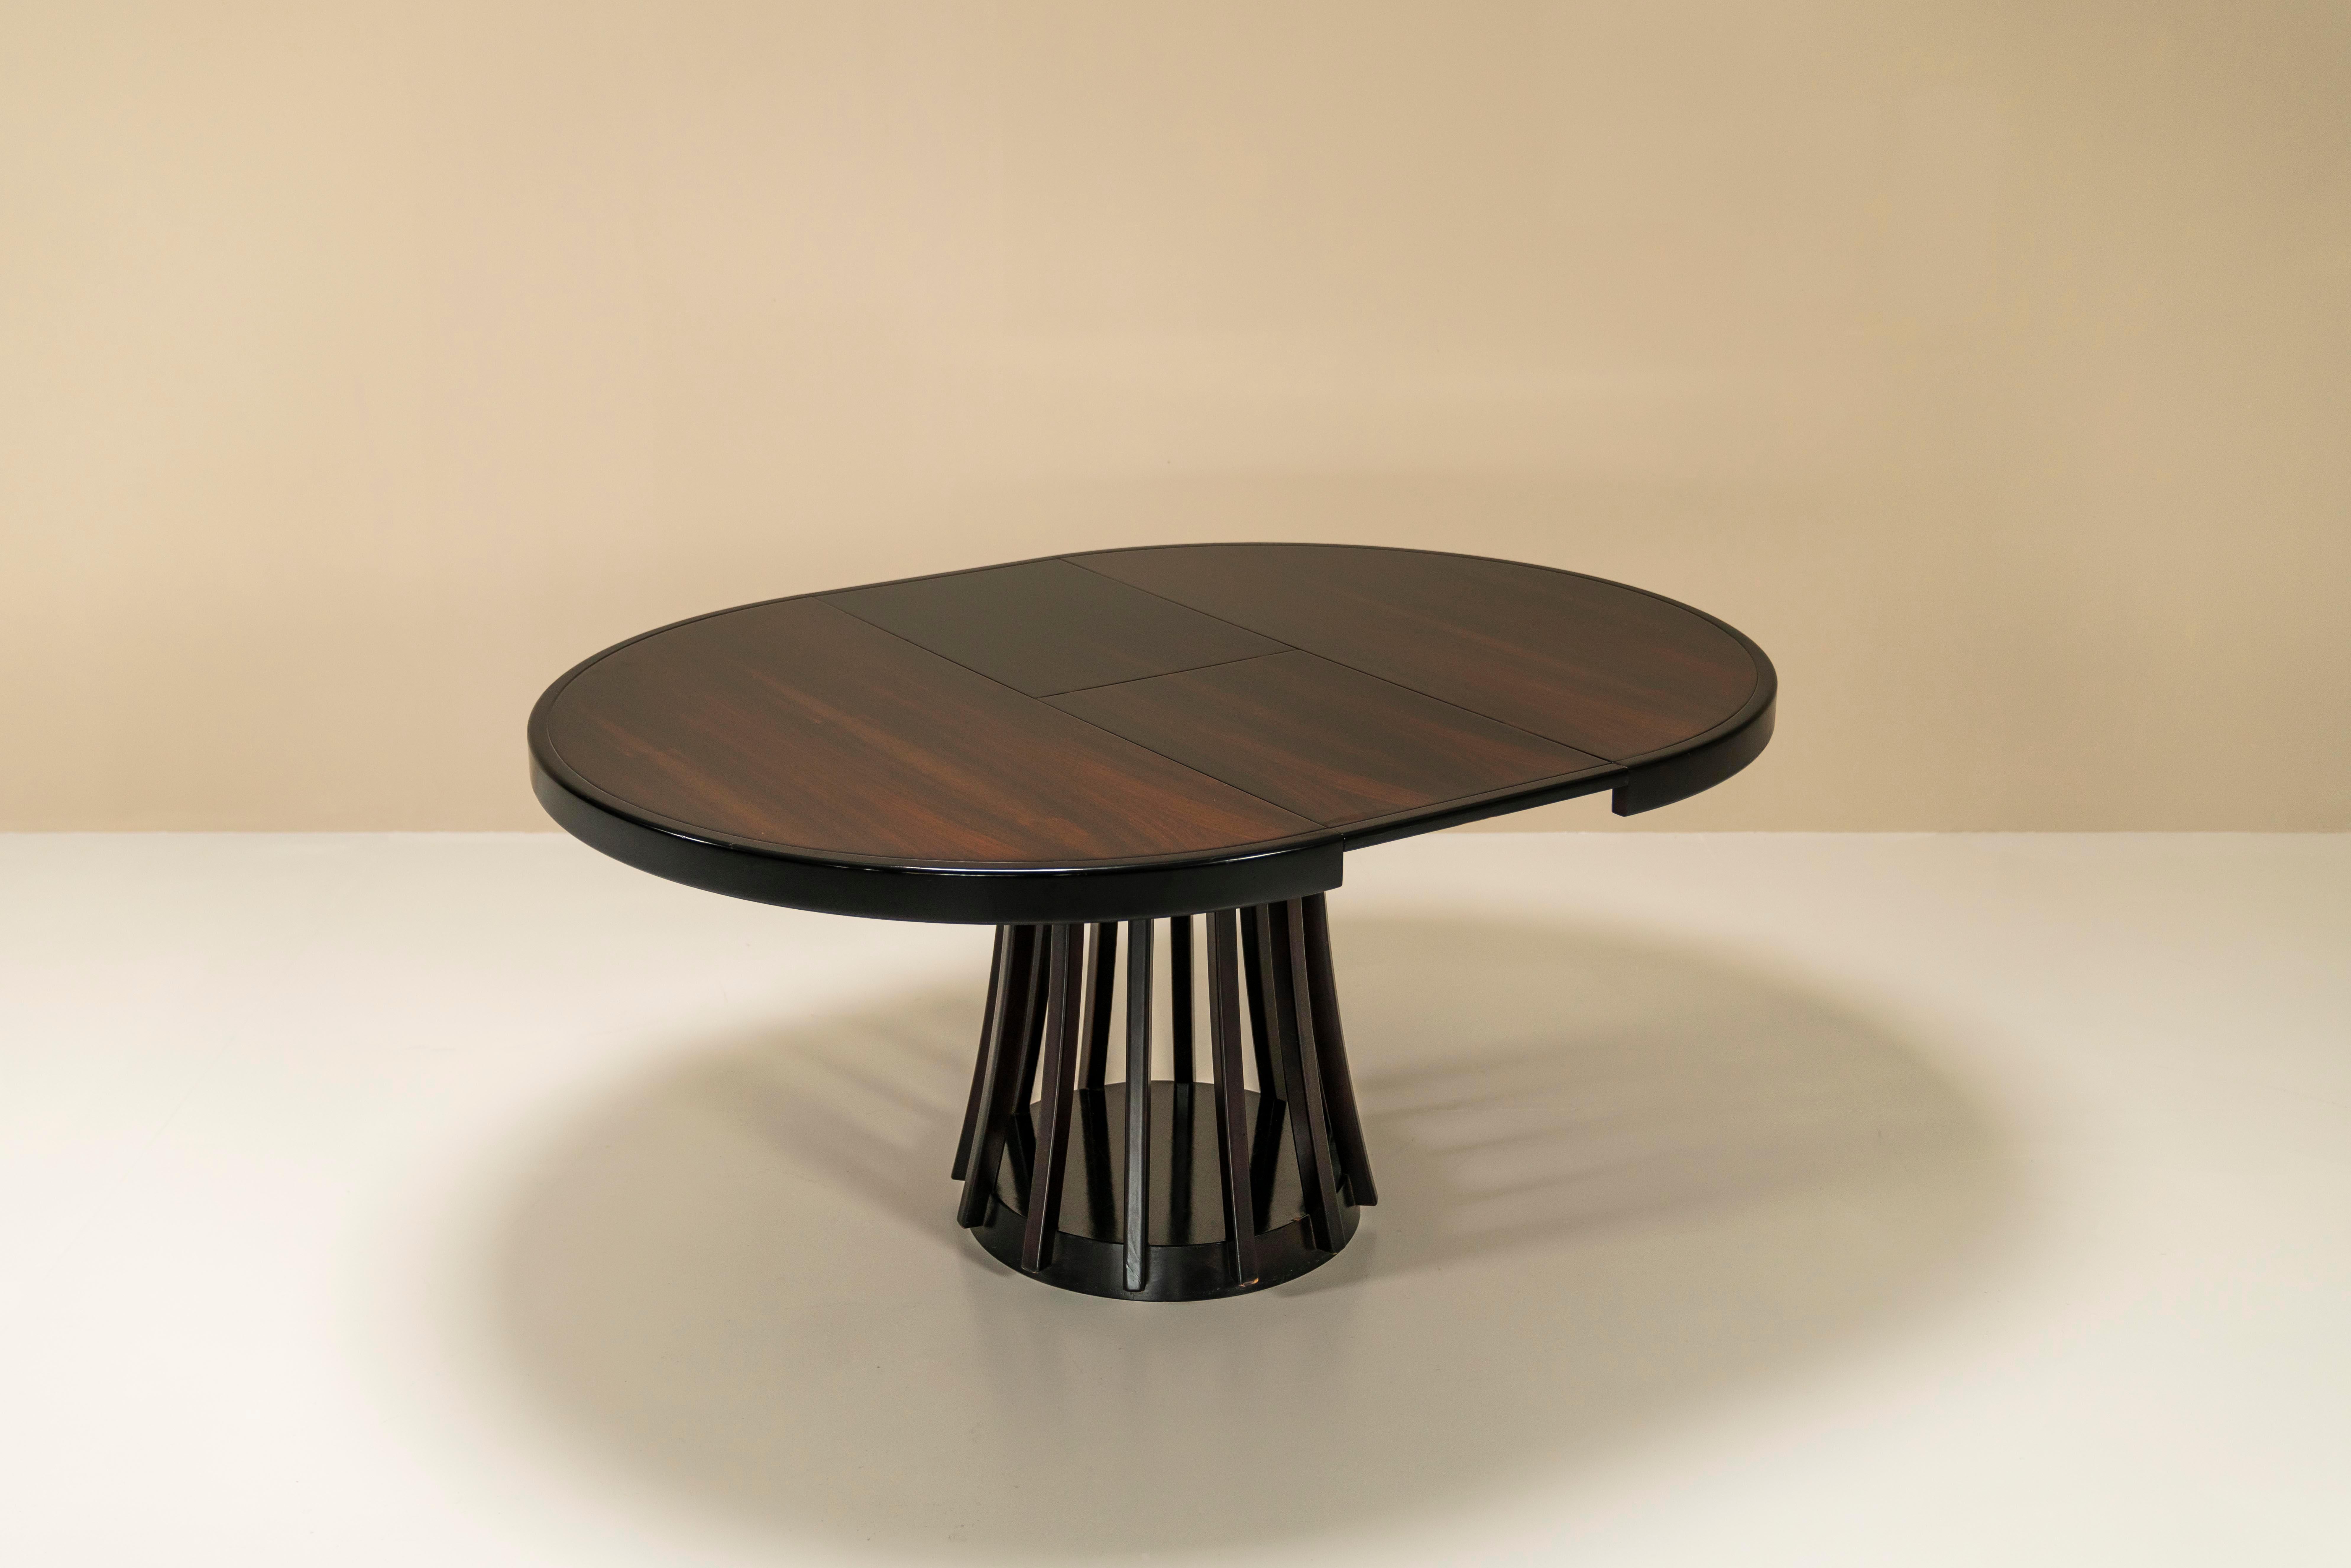 Angelo Mangiarotti 'S11' Round Dining Table in Ebony, Italy, 1970s For Sale 2